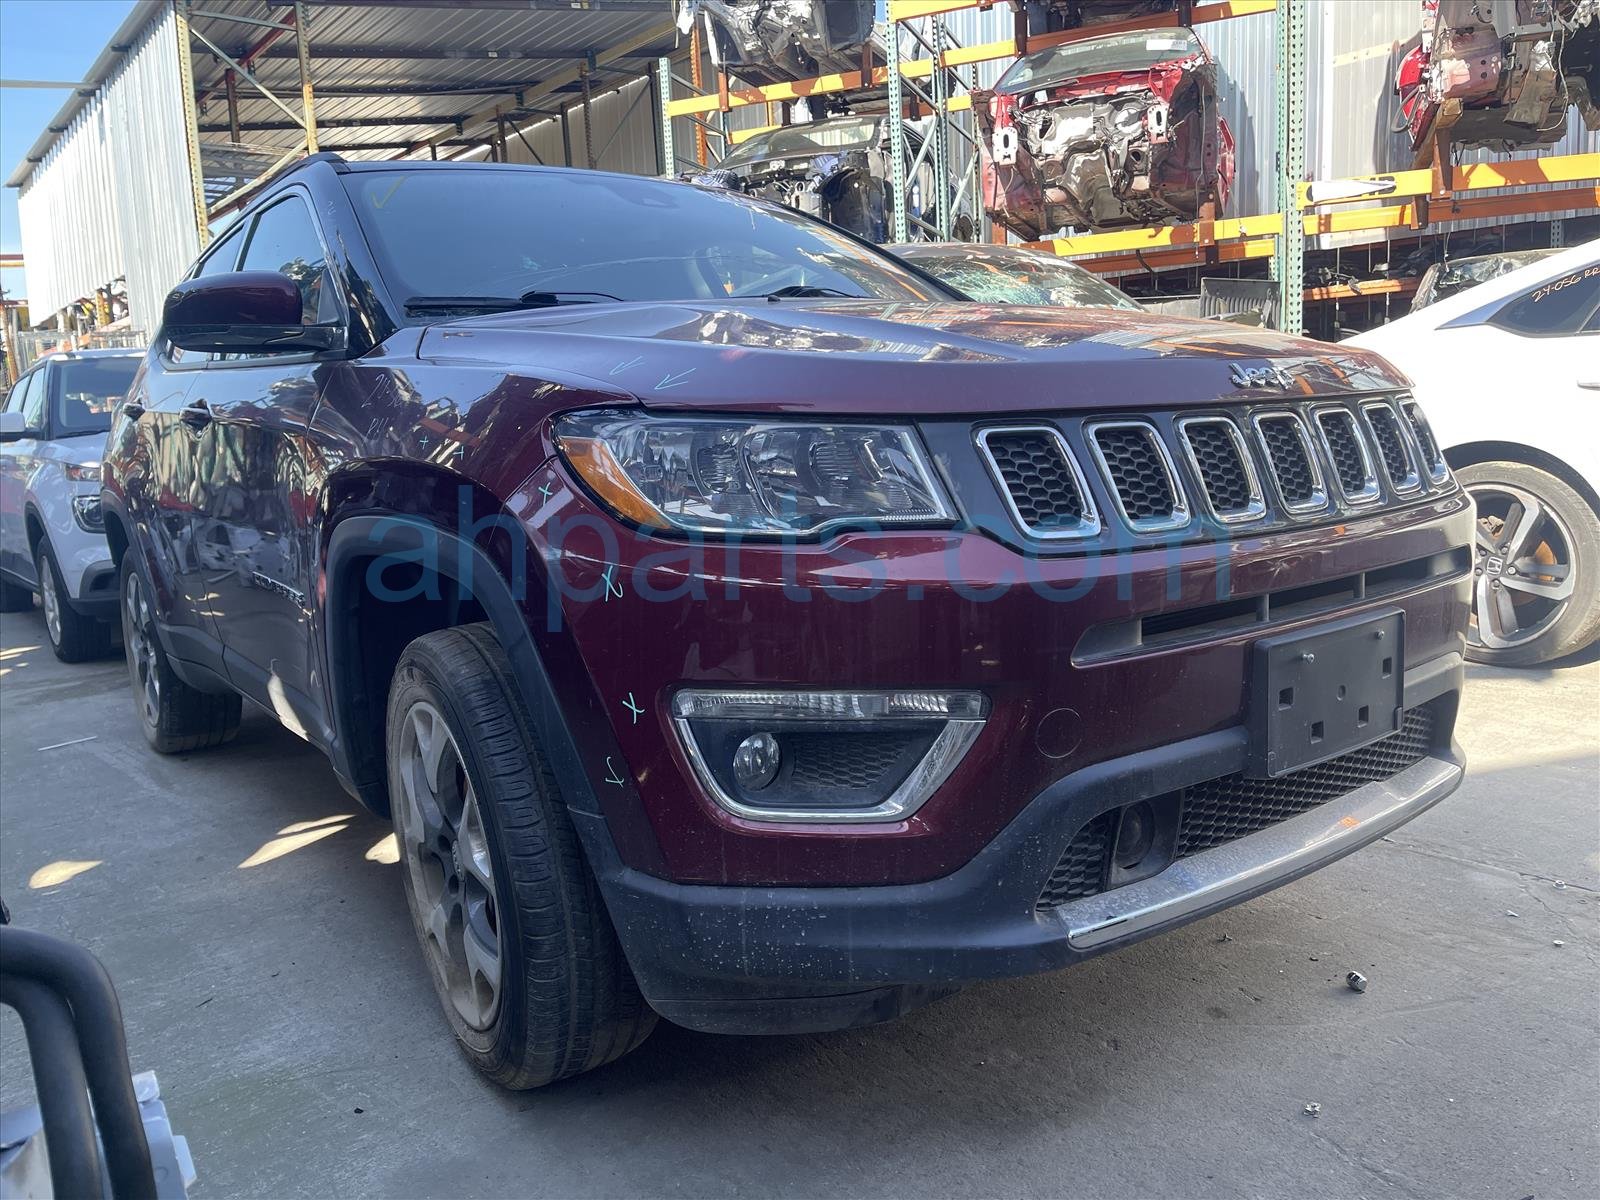 2021 Jeep Compass Replacement Parts